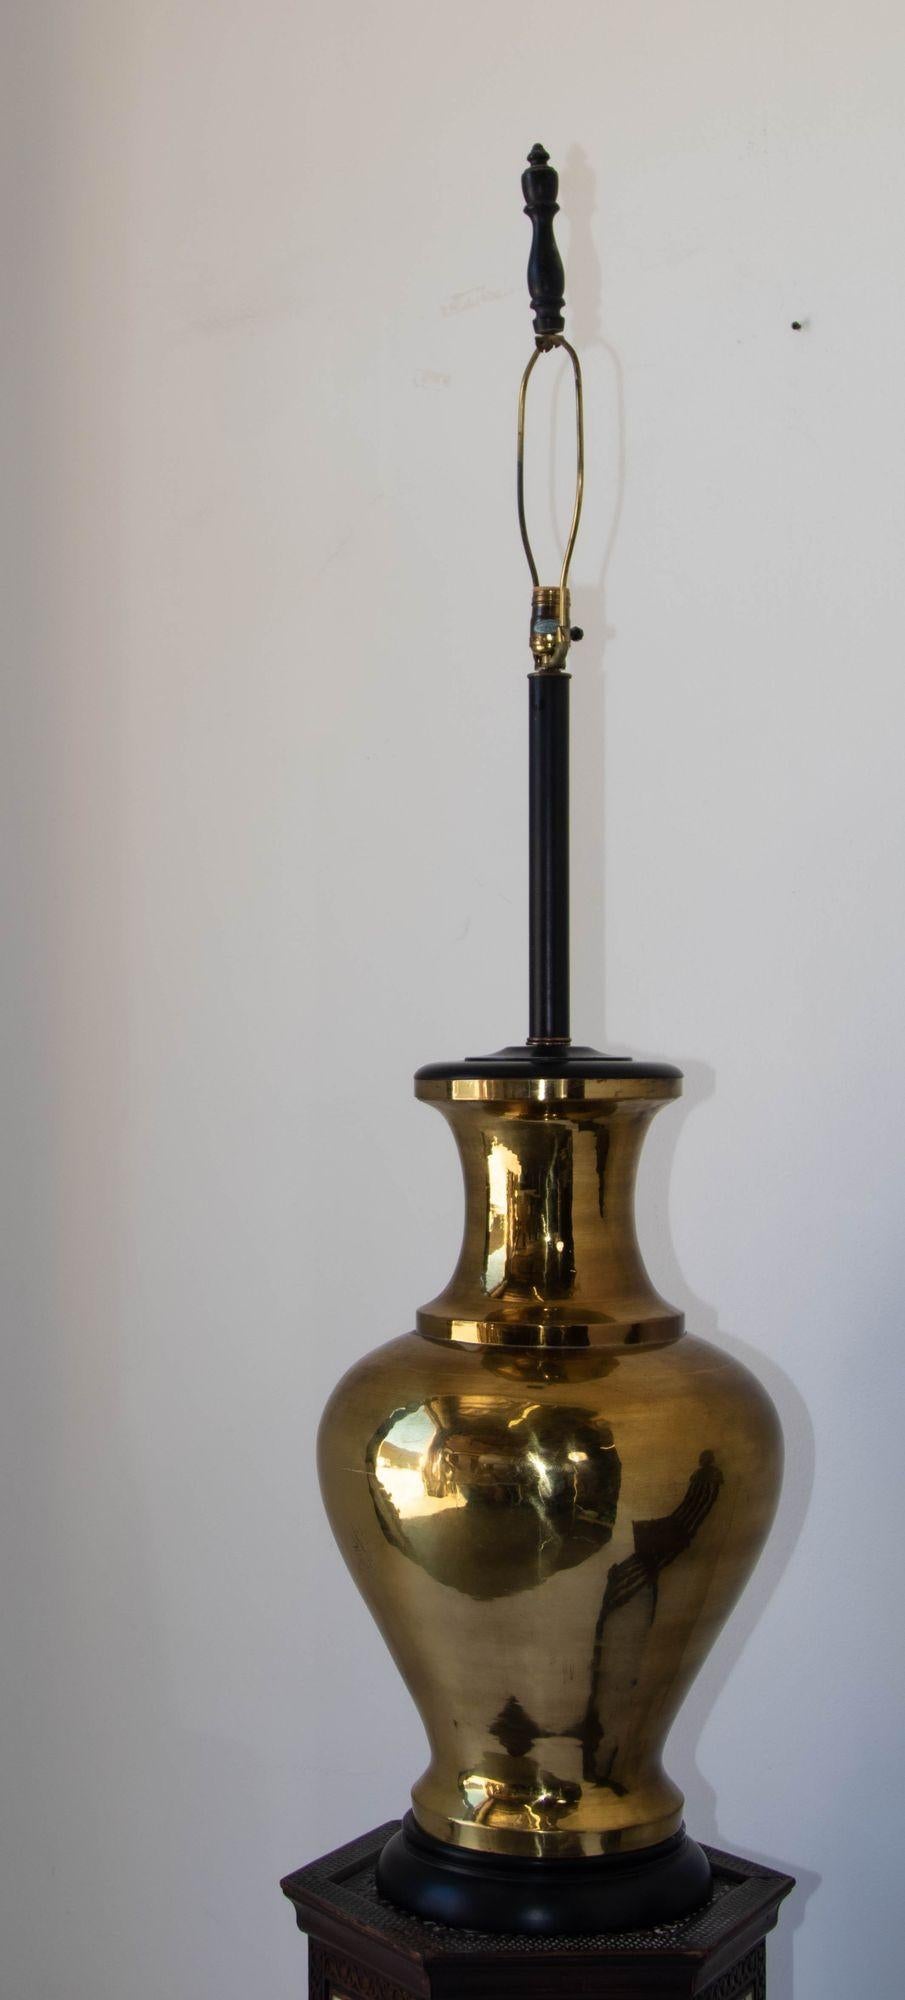 Mid-Century Modern polished brass large scale Chinoiserie brass Urn table lamp 1950's.
A vintage Asian style table lamp with a solid urn in polished brass and original oversized shade.
Hollywood Regency monumental table lamp and impeccably